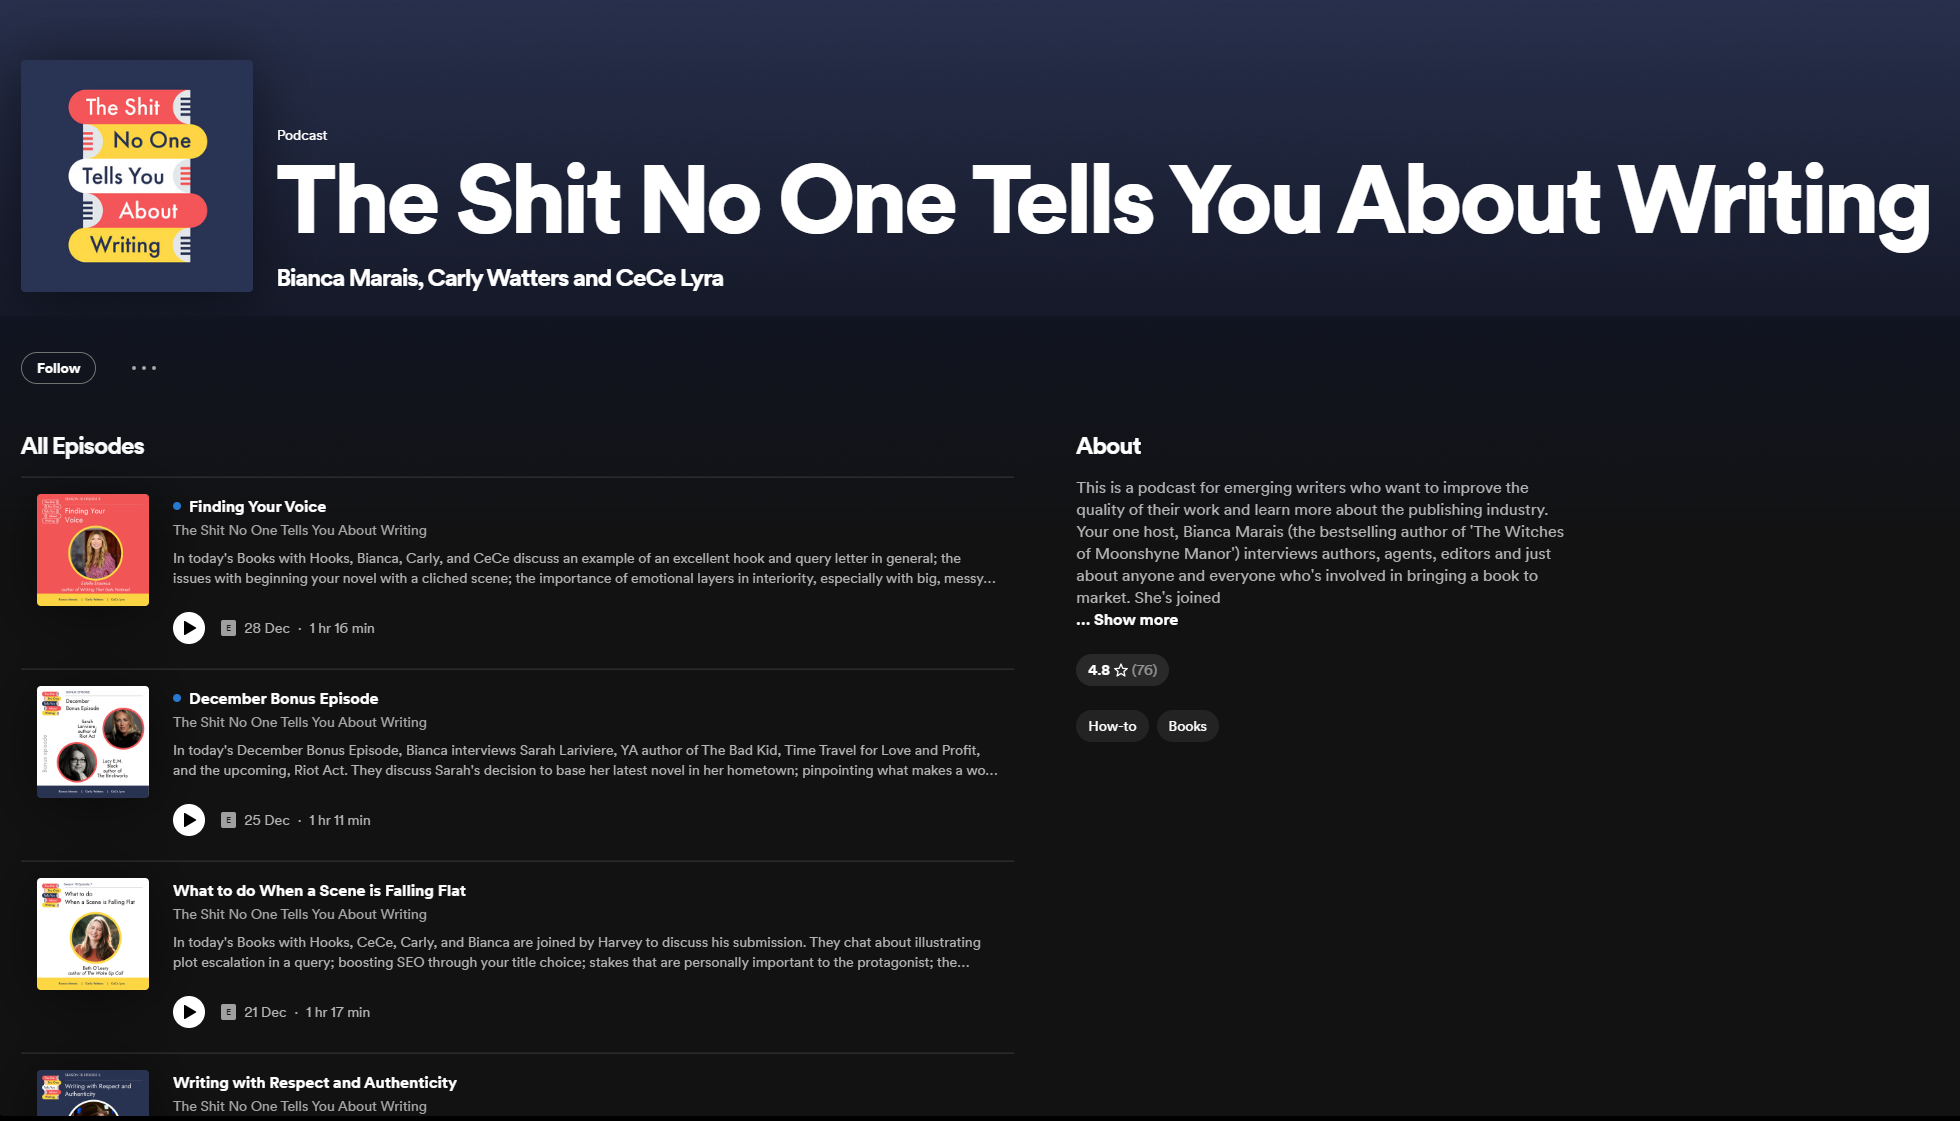 The Sh*t No One Tells You About Writing podcast